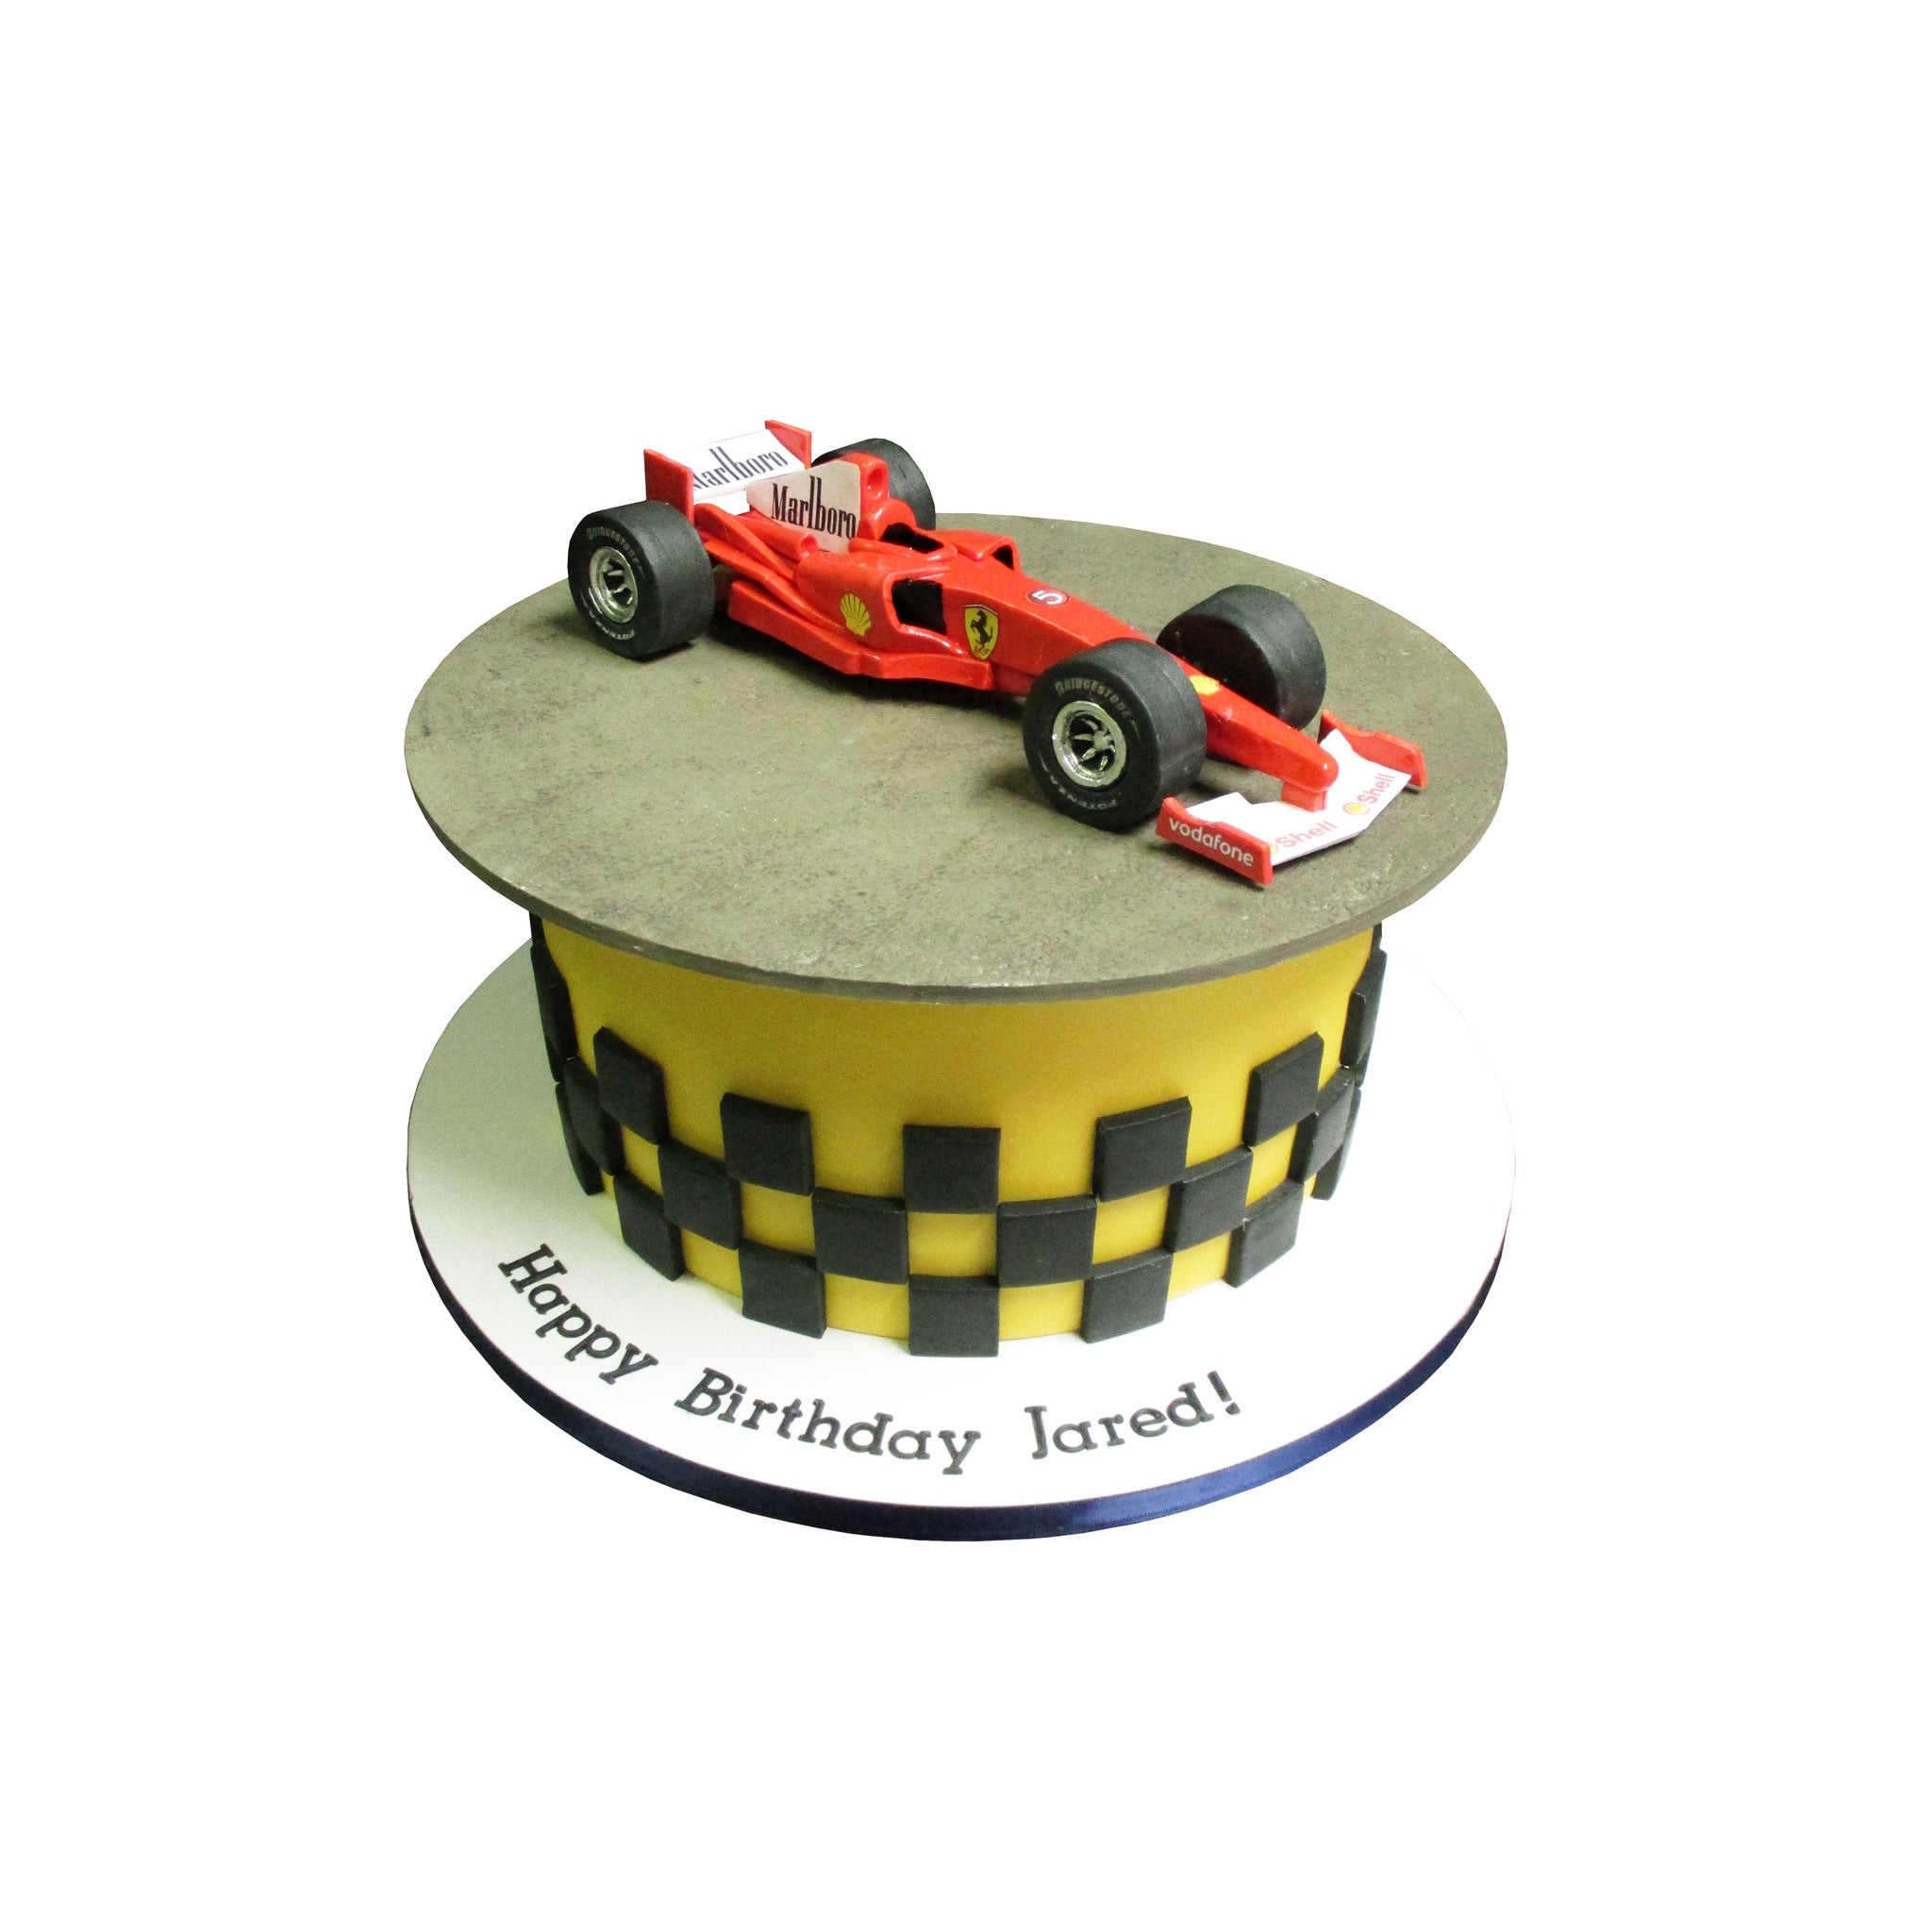 185 Car Model Cake Royalty-Free Photos and Stock Images | Shutterstock